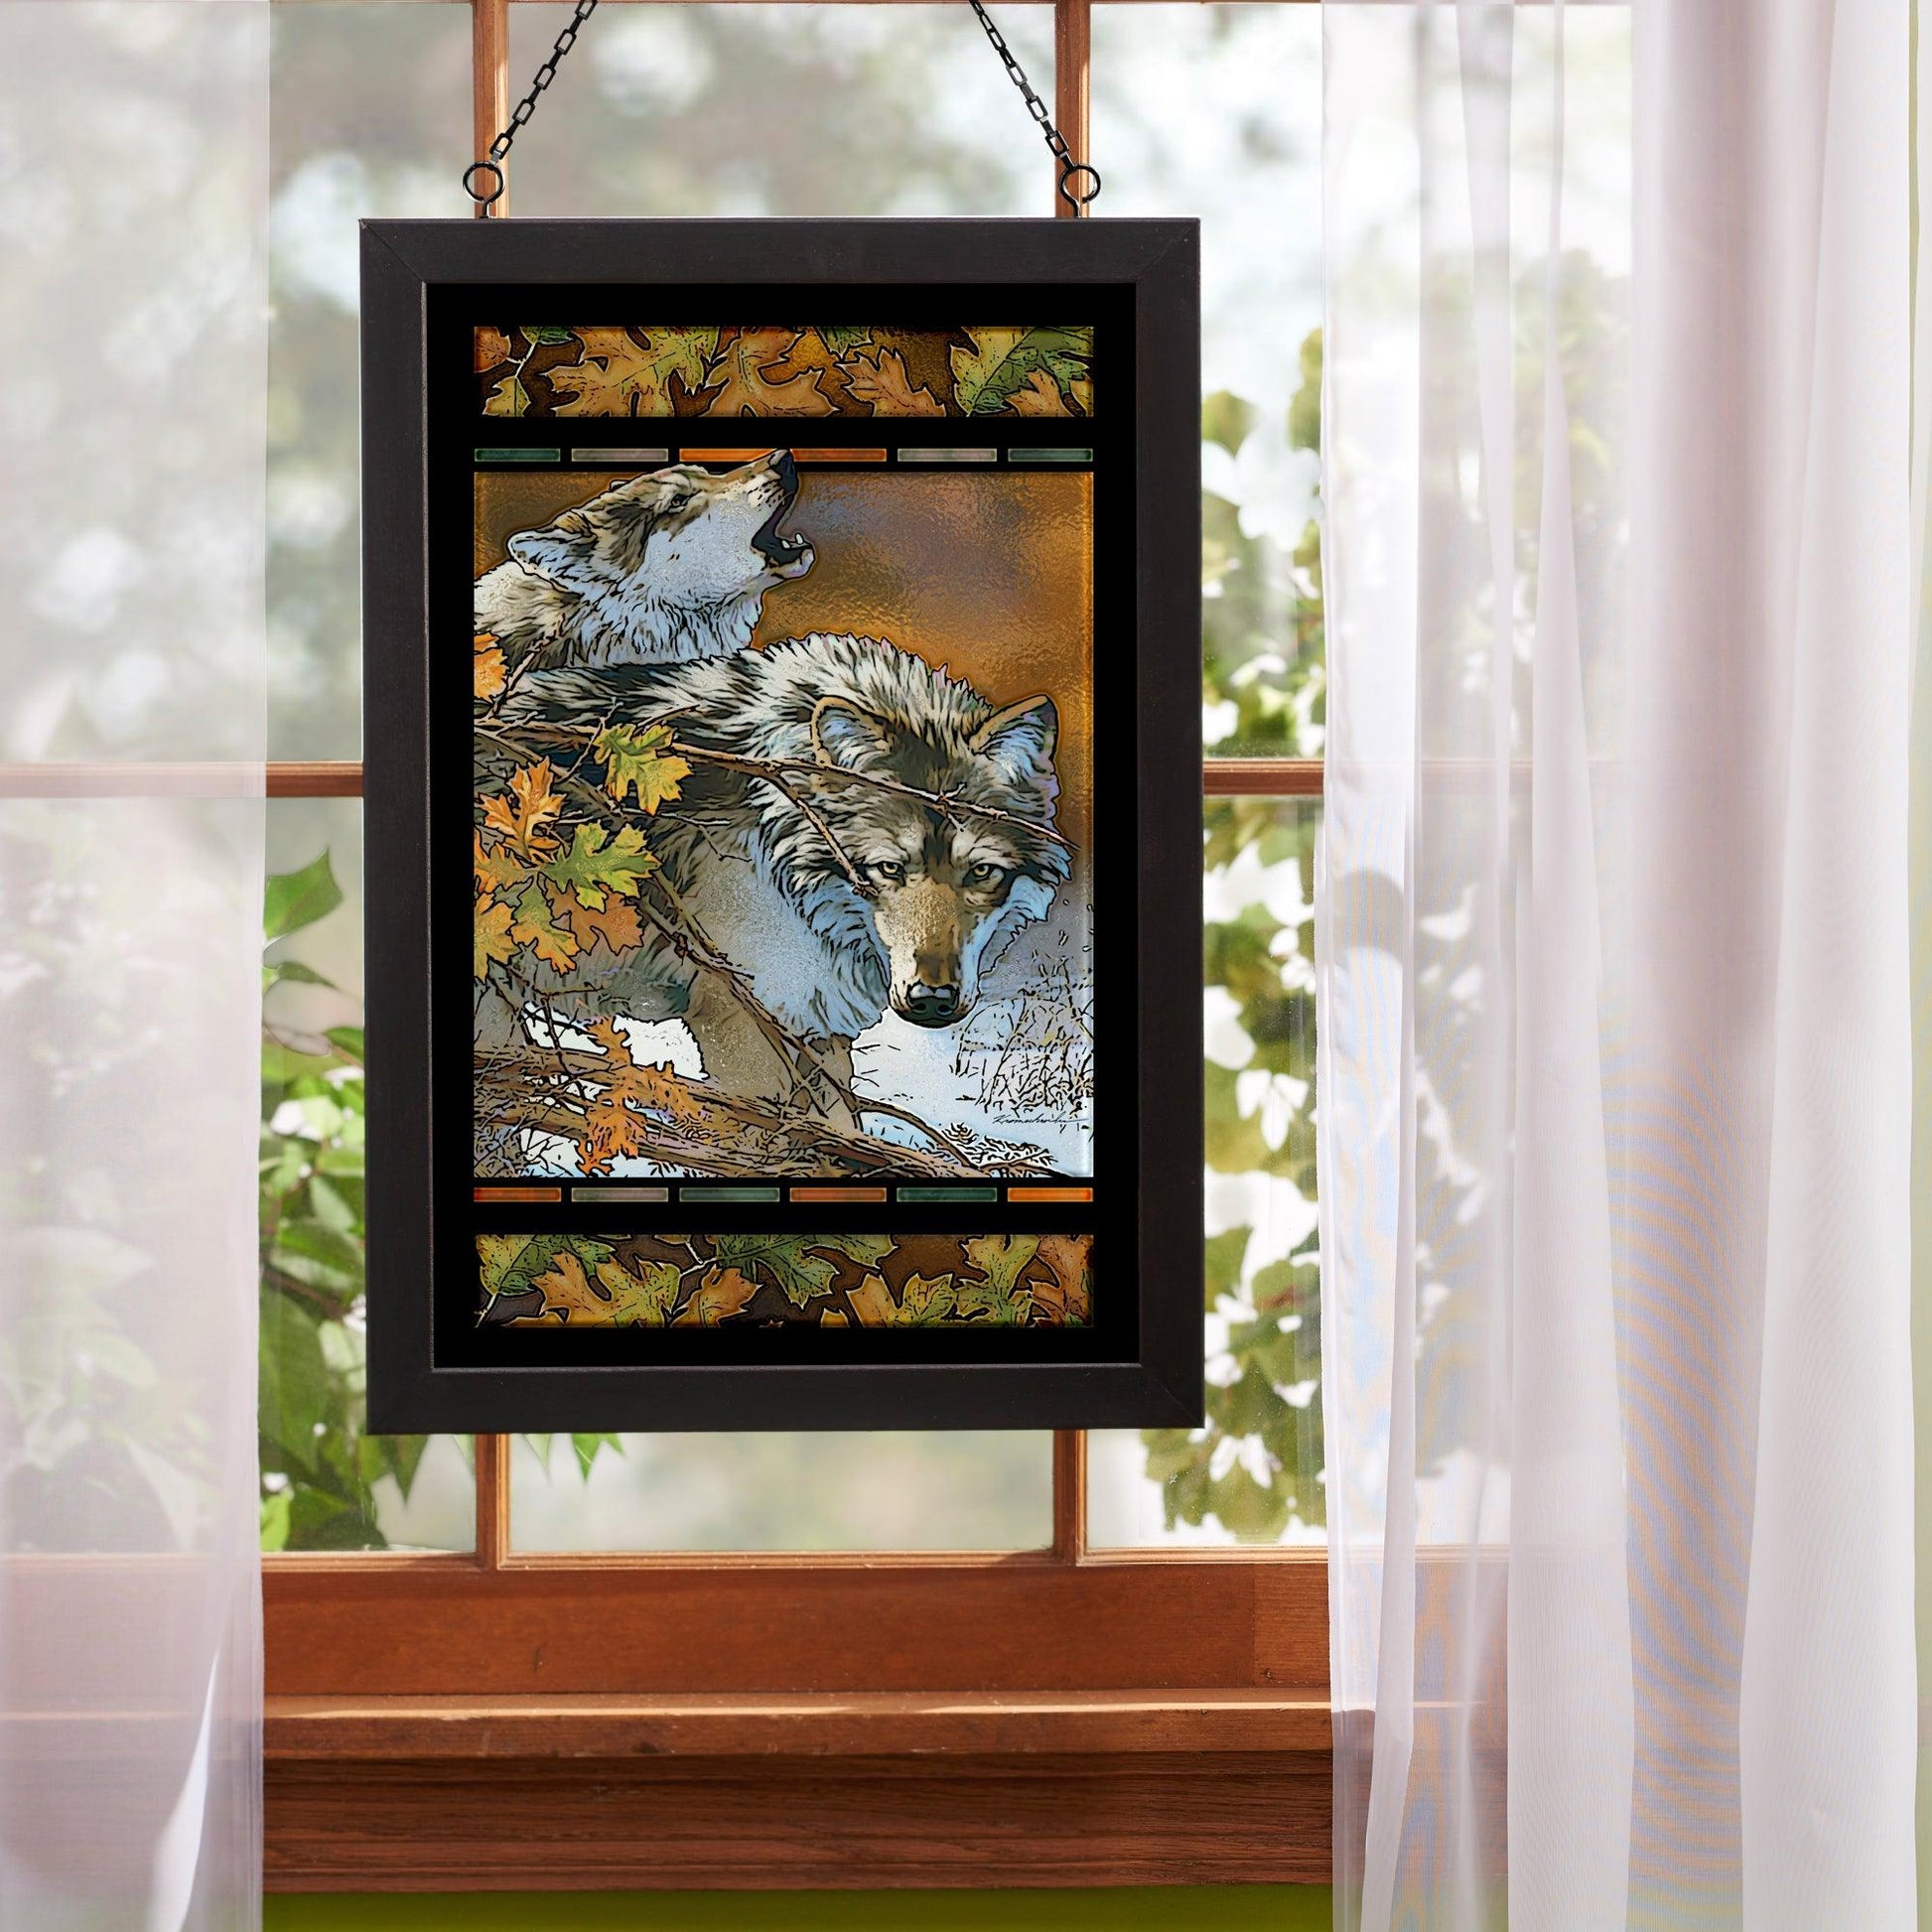 Body Language - Wolves Stained Glass Art - Wild Wings